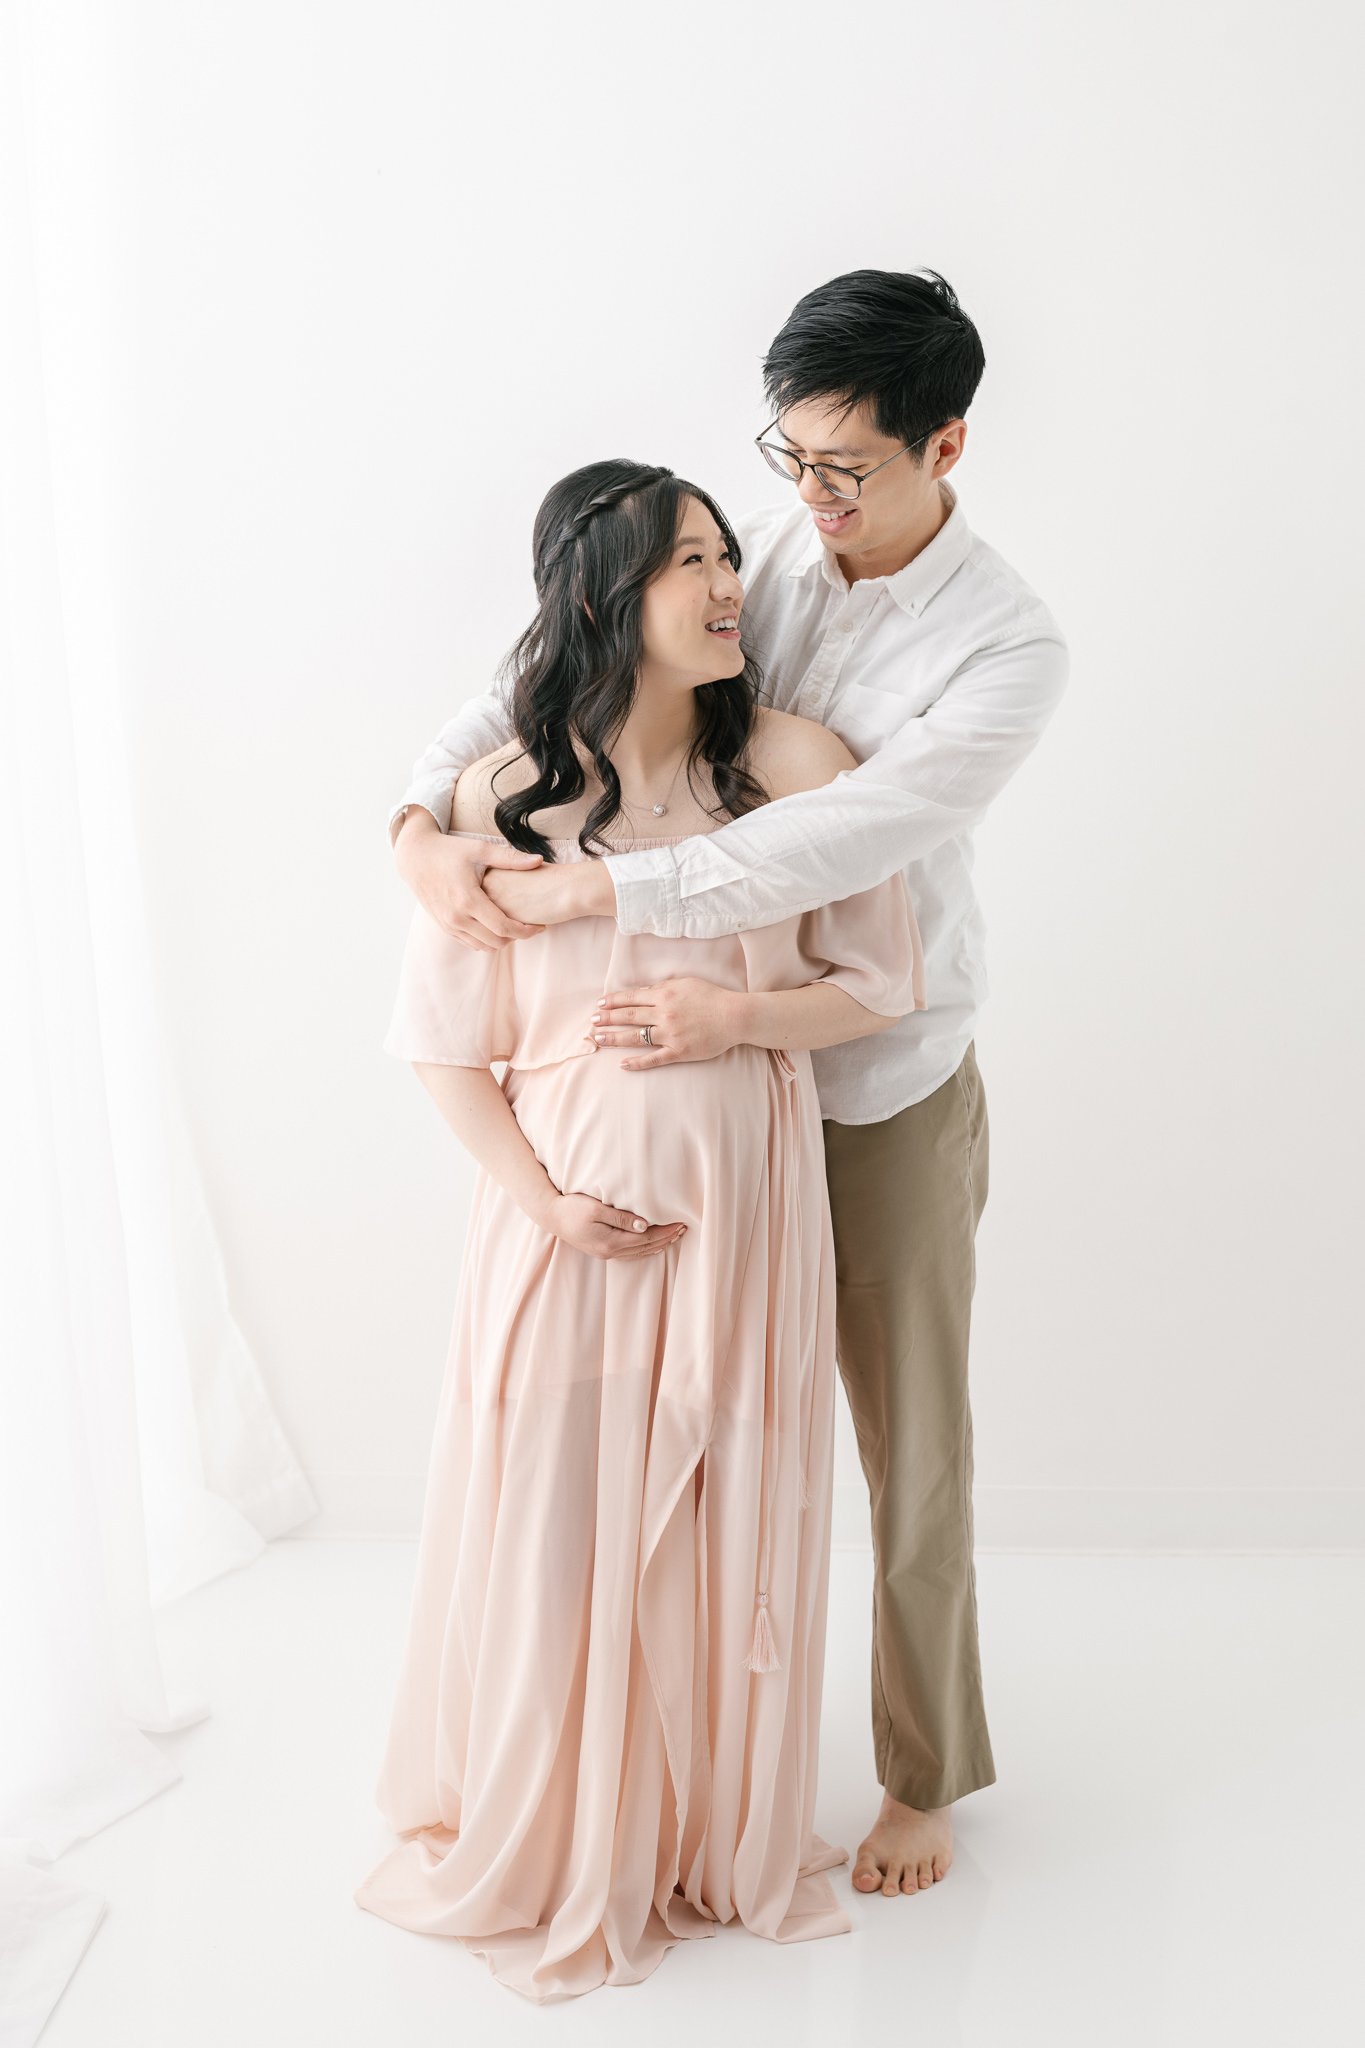  A husband wraps his arms around his wife loving her by Nicole Hawkins PHotgrpahy during a maternity session. husband holding his pregnant wife #NicoleHawkinsPhotography #NicoleHawkinsMaternity #MaternityPhotography #Maternitystyle #NJMaternity #Time